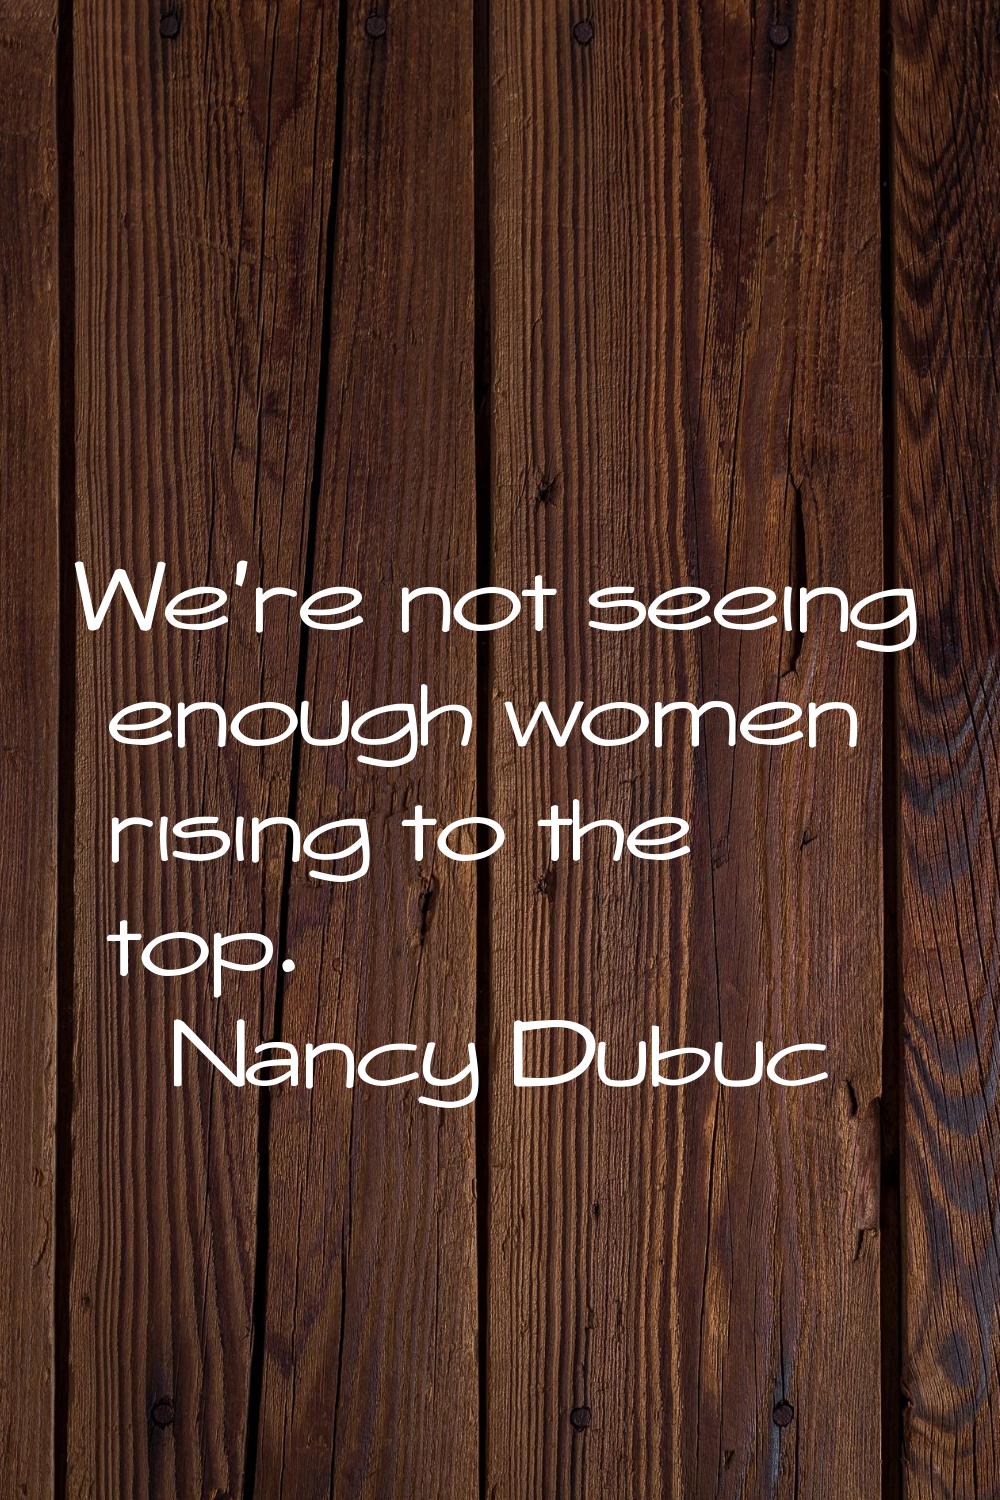 We're not seeing enough women rising to the top.